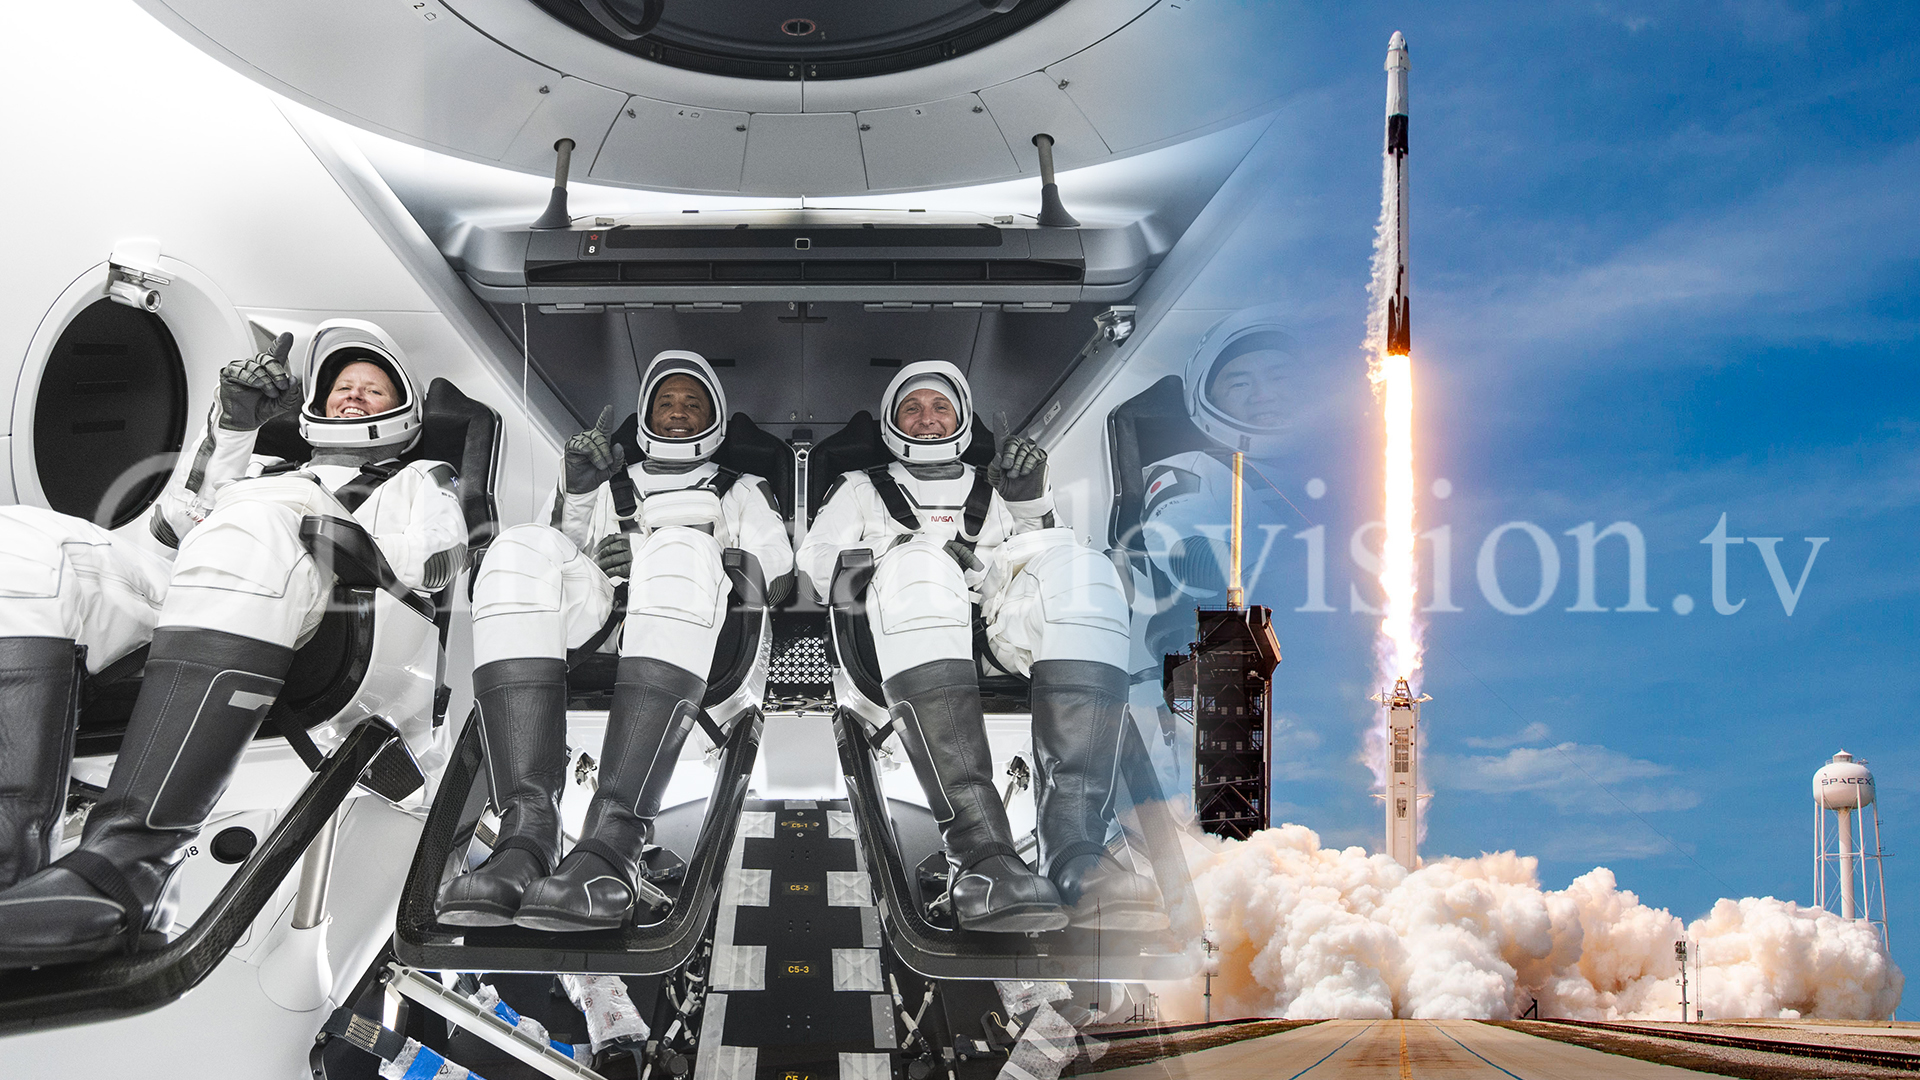 NASA, SpaceX target Oct. 31 for next manned mission to space station